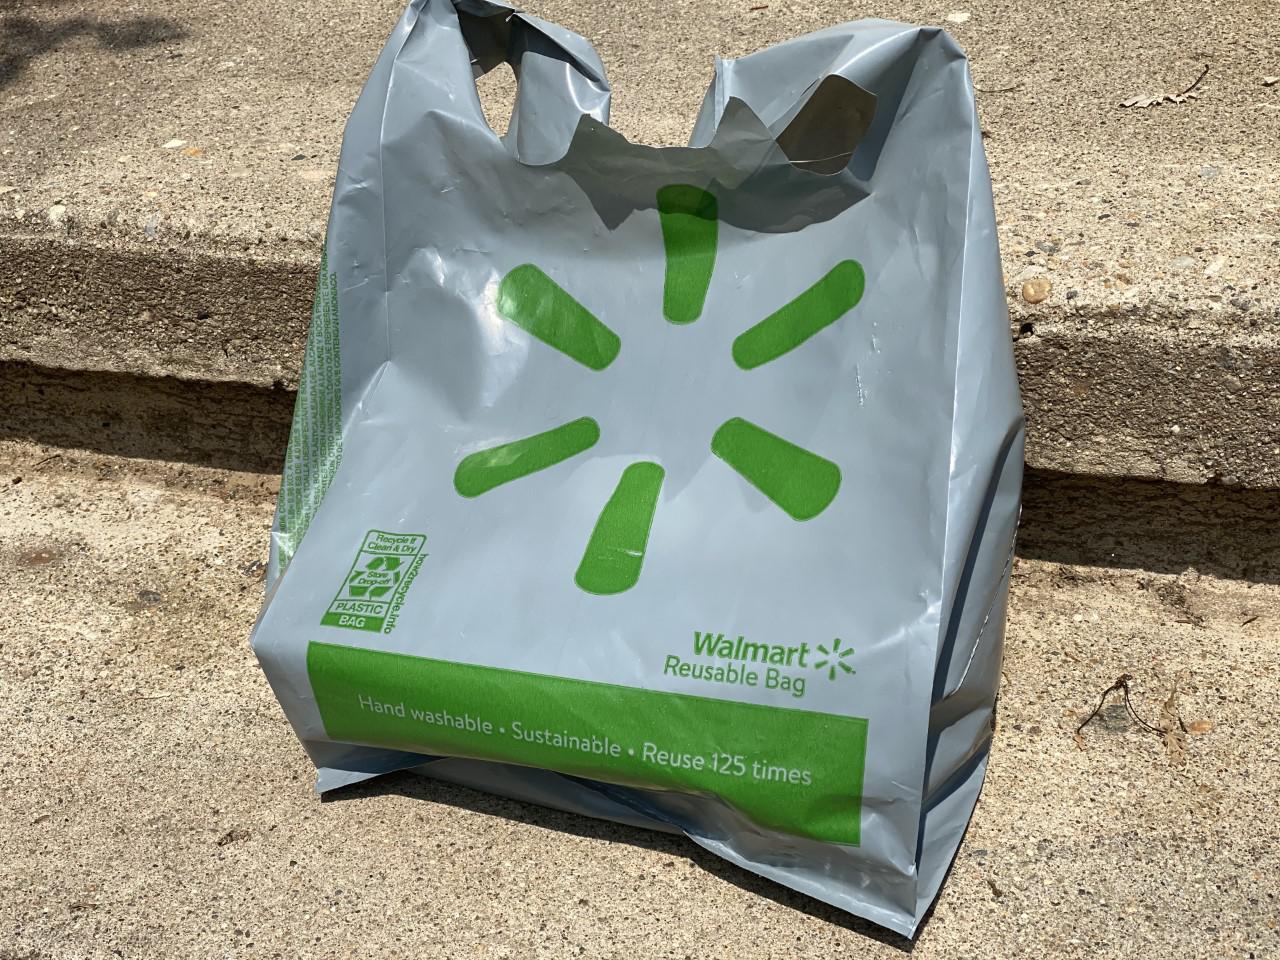 Plastic bag bans are spreading. But are they truly effective?